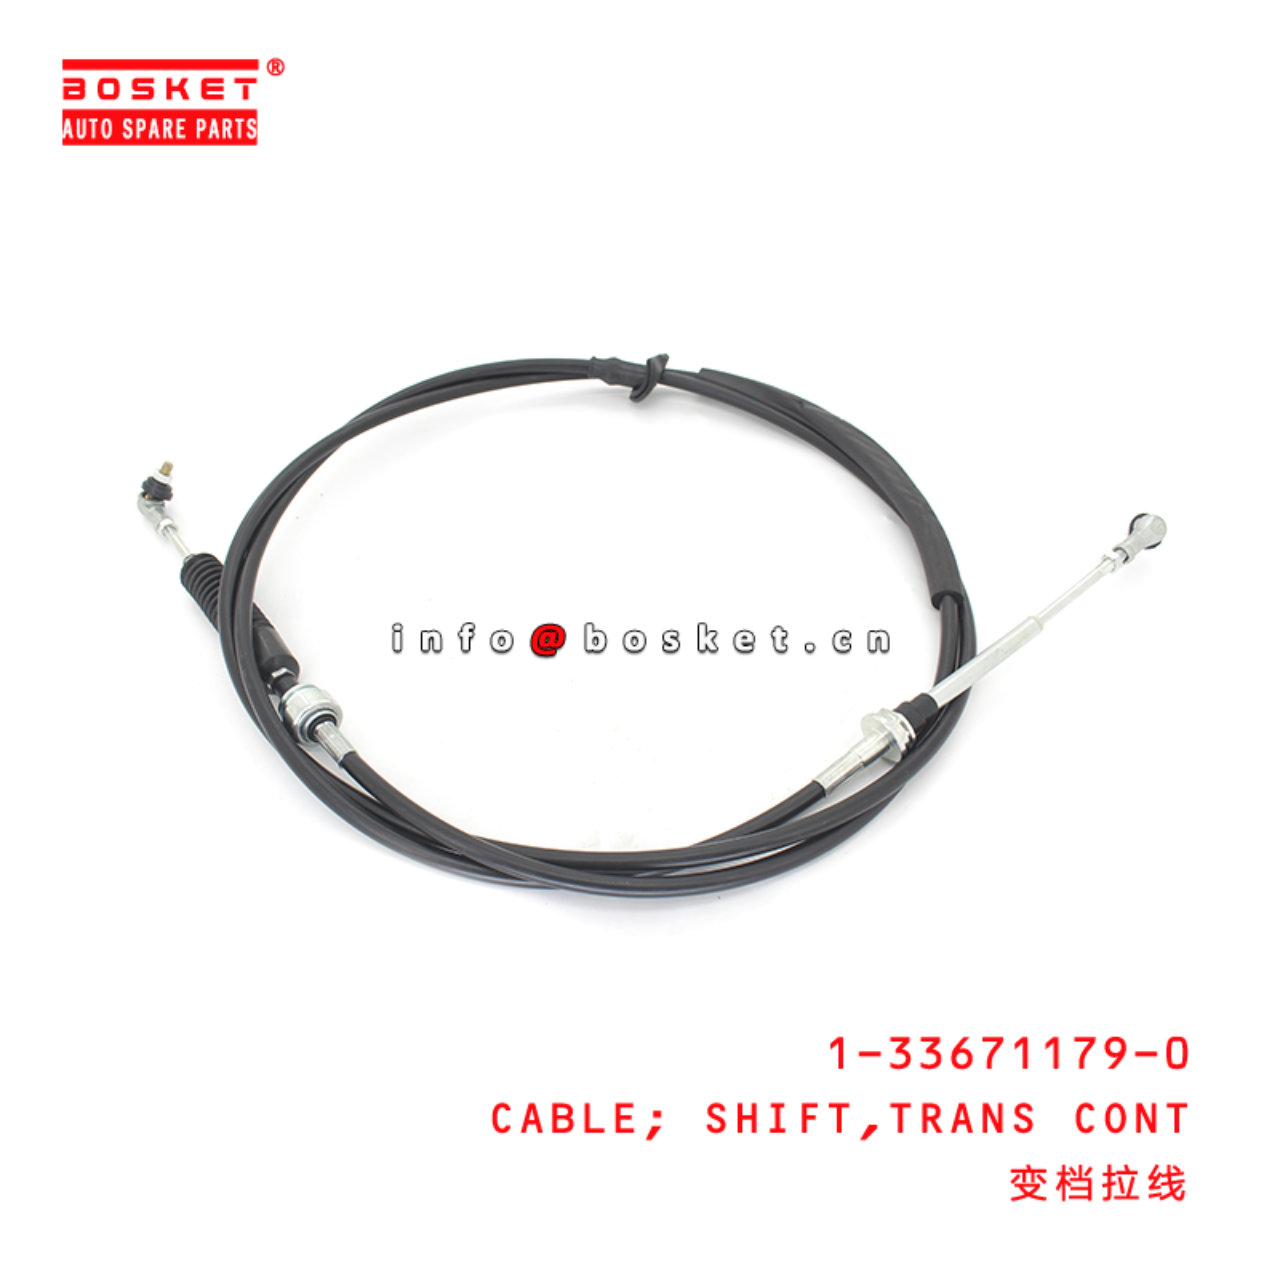 1-33671179-0 Shift Transmission Cont Cable Suitable for ISUZU FVR34 6HK1 1336711790